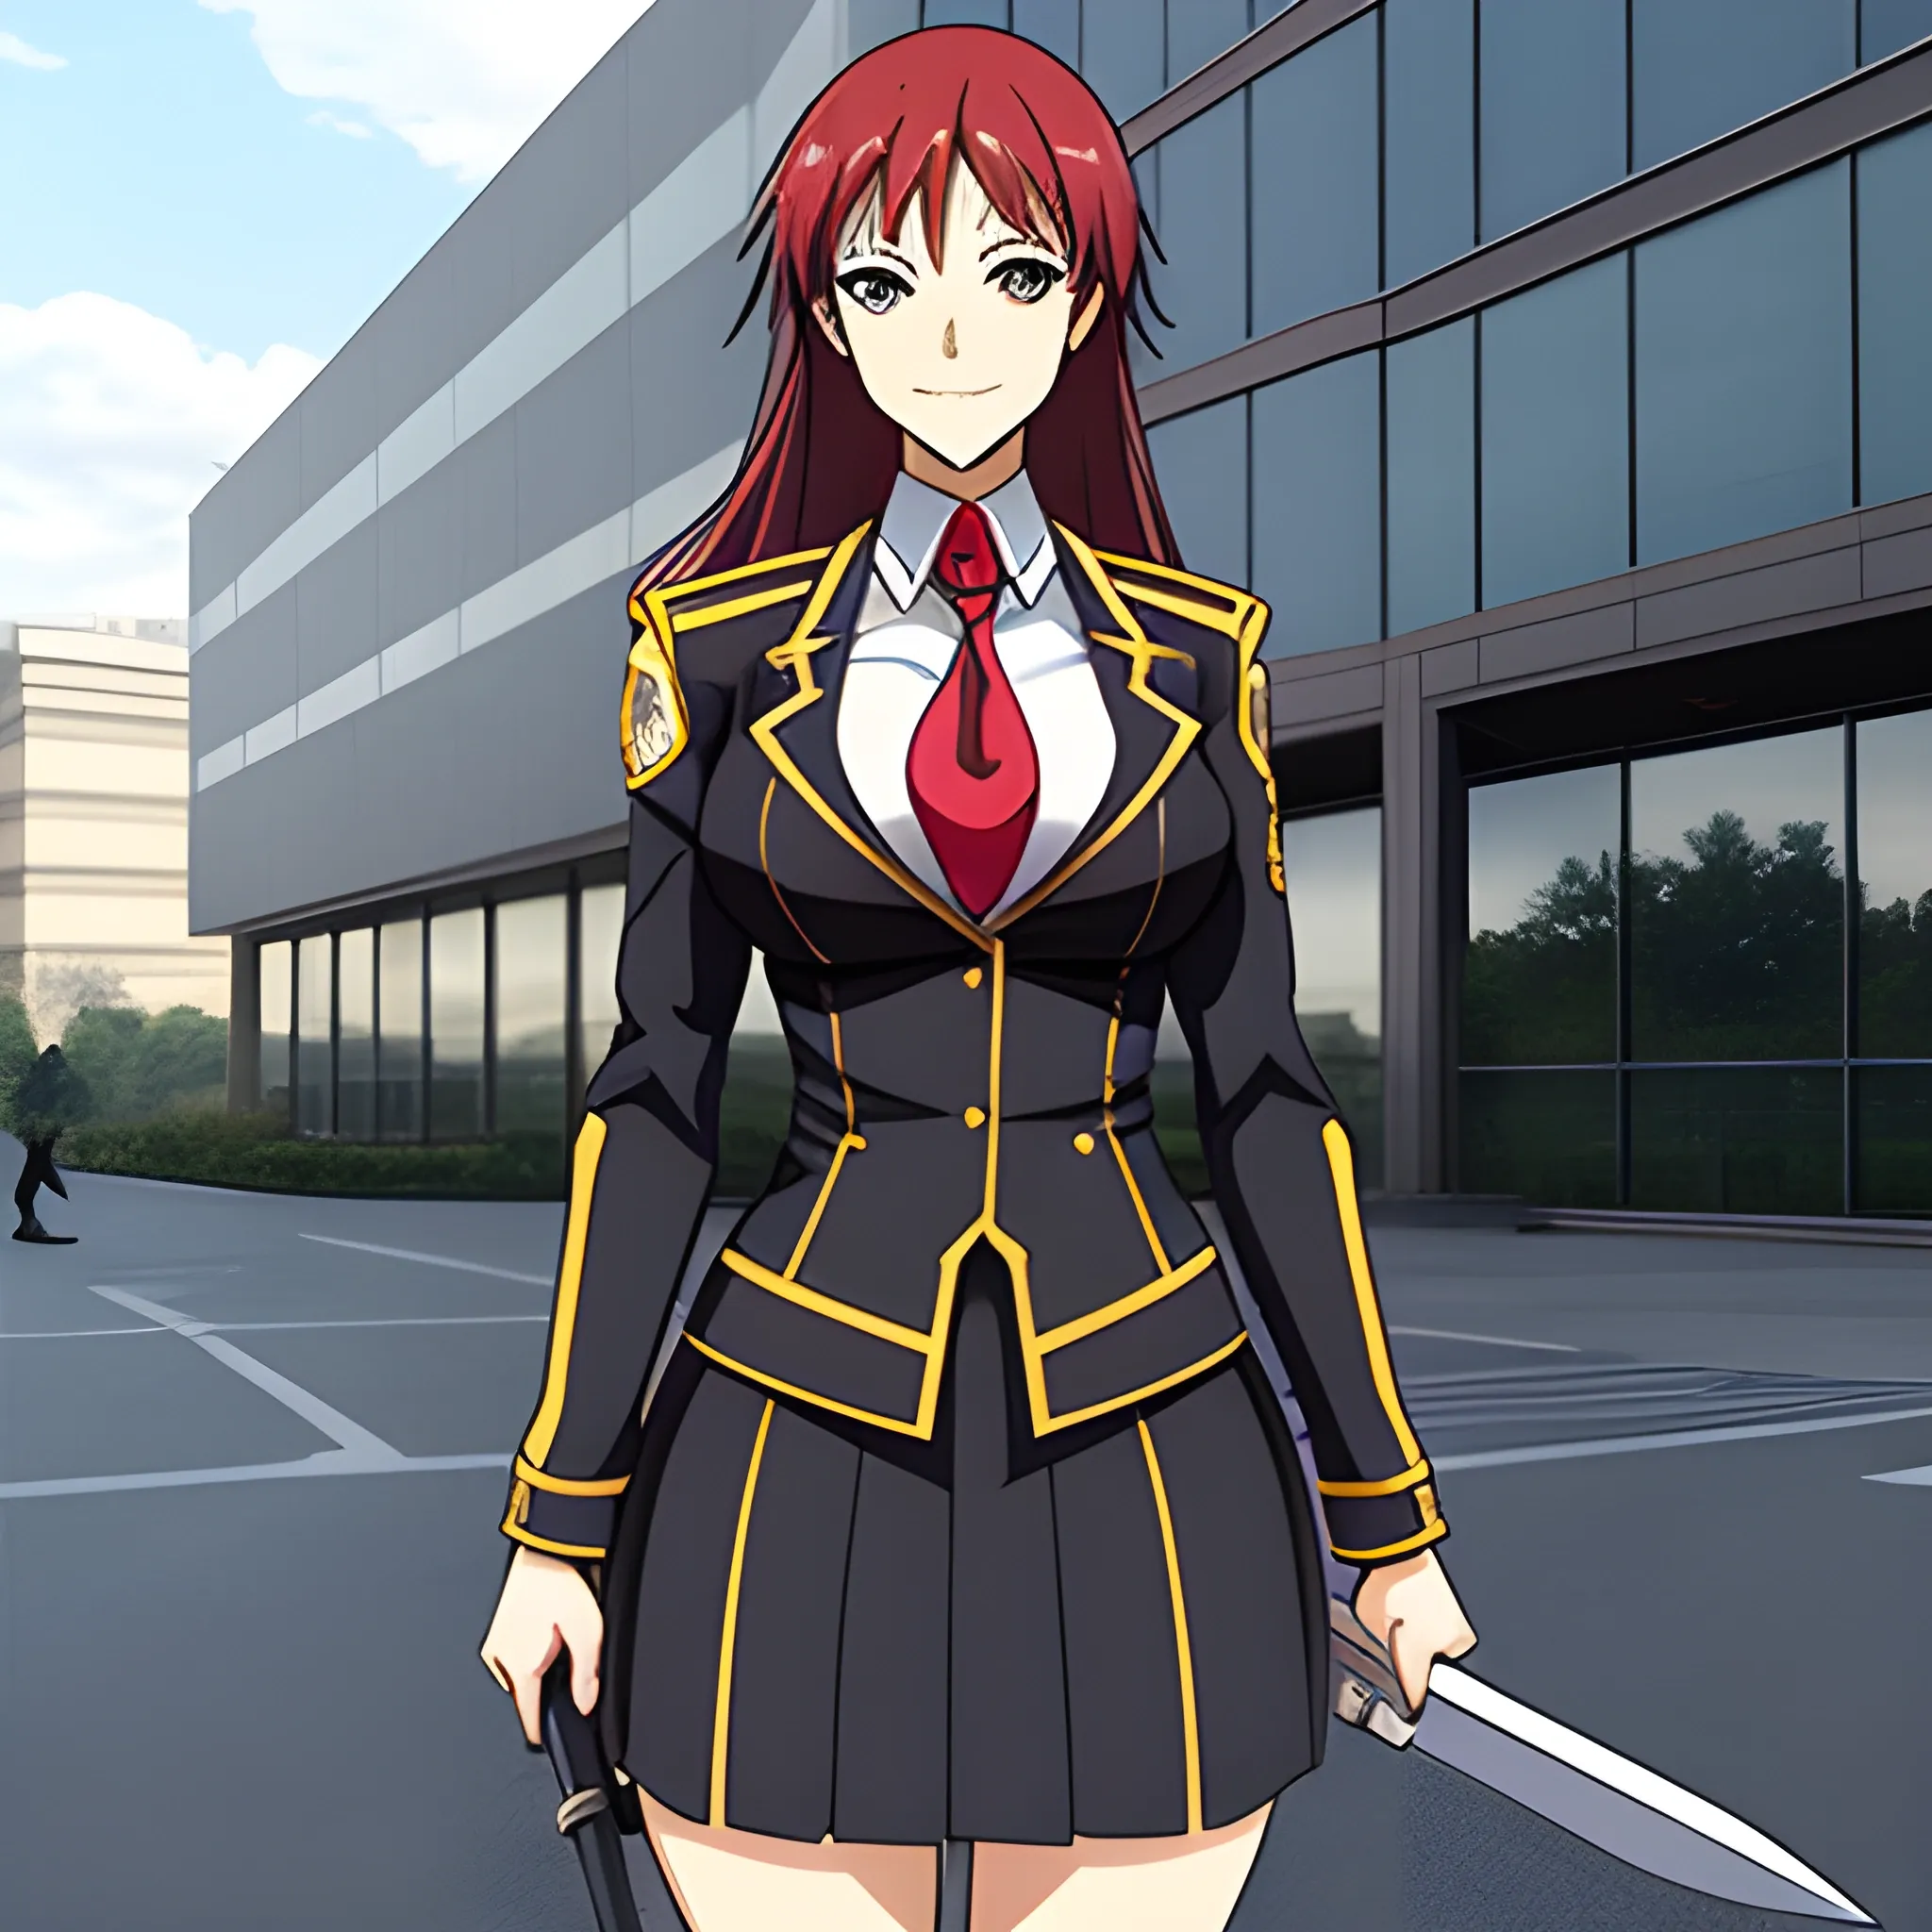 The anime school girl's uniform is a symbol of strength and determination, as she stands in the midst of a chaotic classroom, ready to take on any challenge and emerge victorious. With her trusty sword in hand, she is a force to be reckoned with.